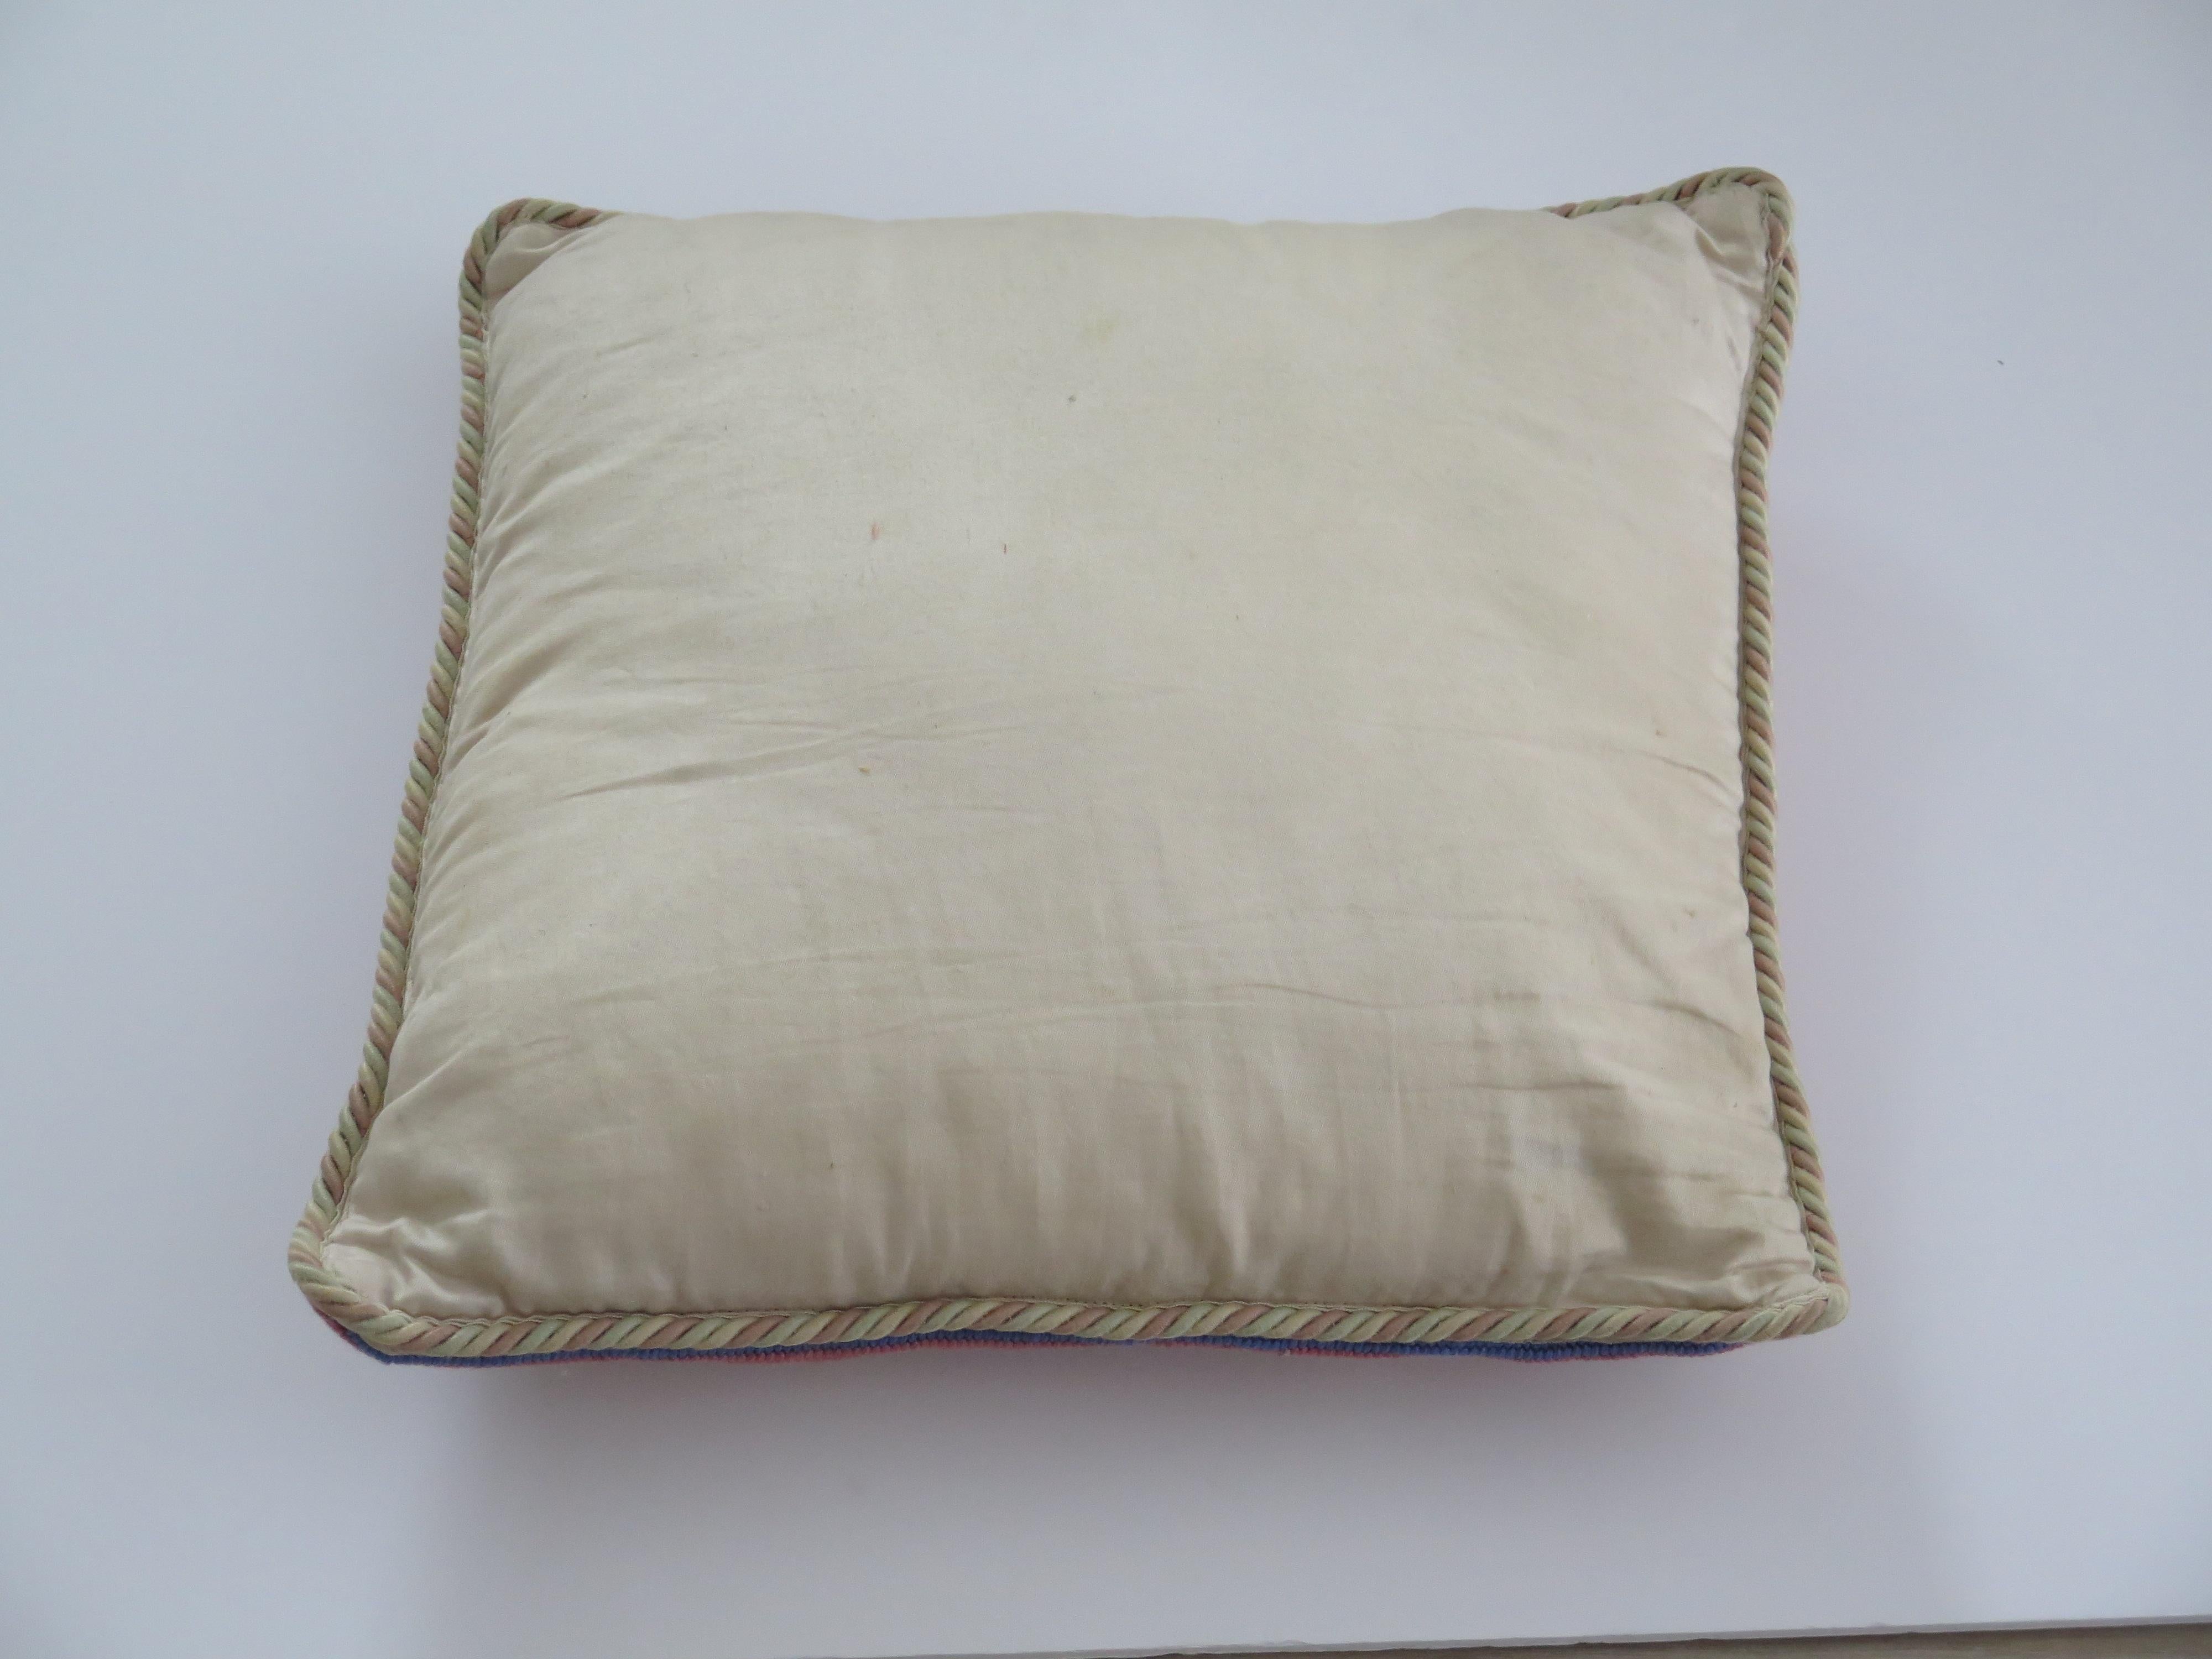 Woven Cushion or Pillow with Flower Vase pattern in pastel shades, Circa 1930s For Sale 4